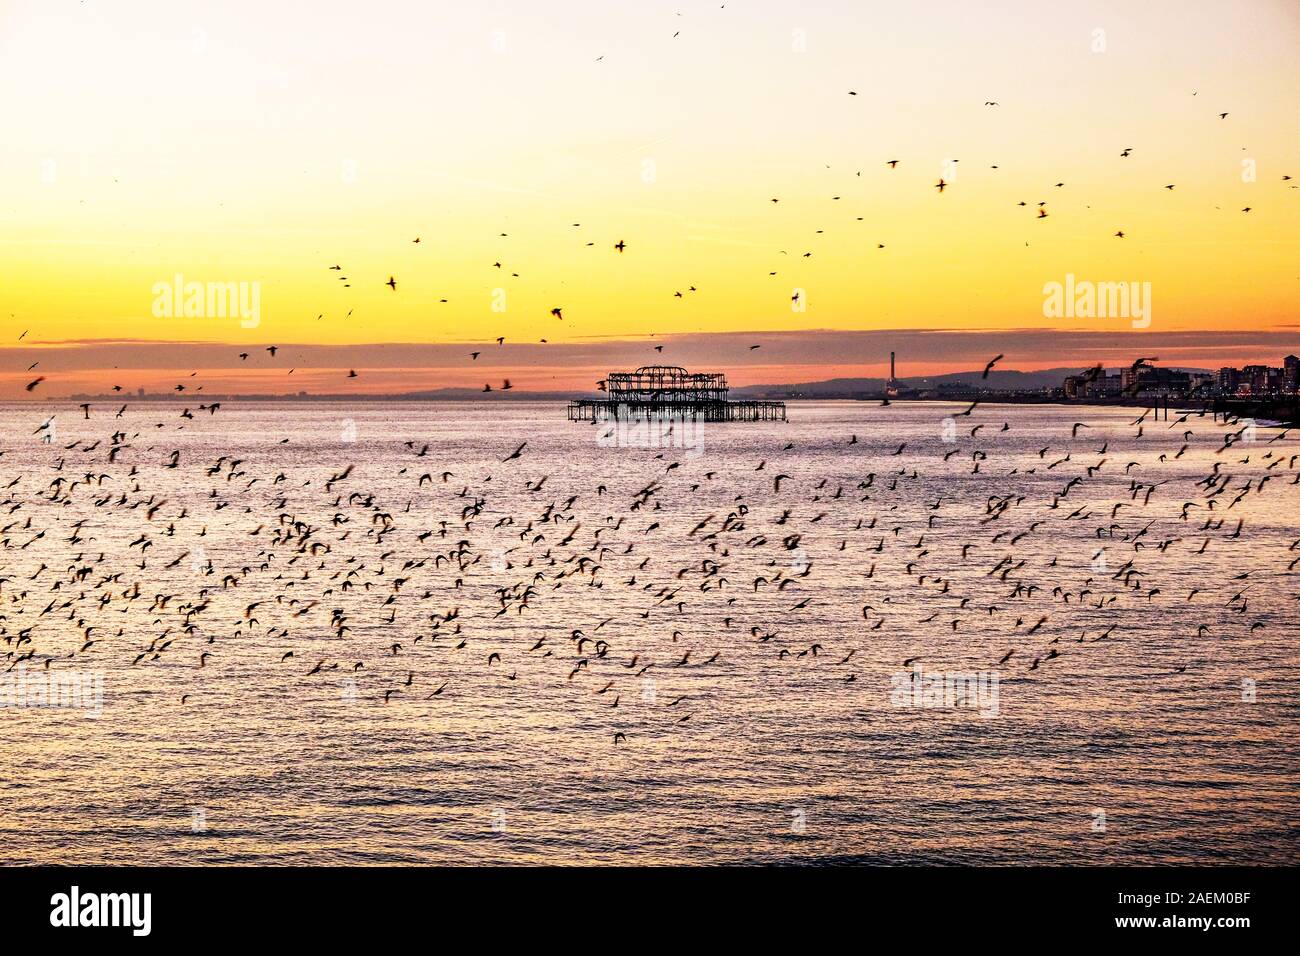 hundreds of starlings are flying in beautiful murmuration over the sea at sunset, behind is West Pier Brighton the sky is golden yellow, Brighton seaf Stock Photo